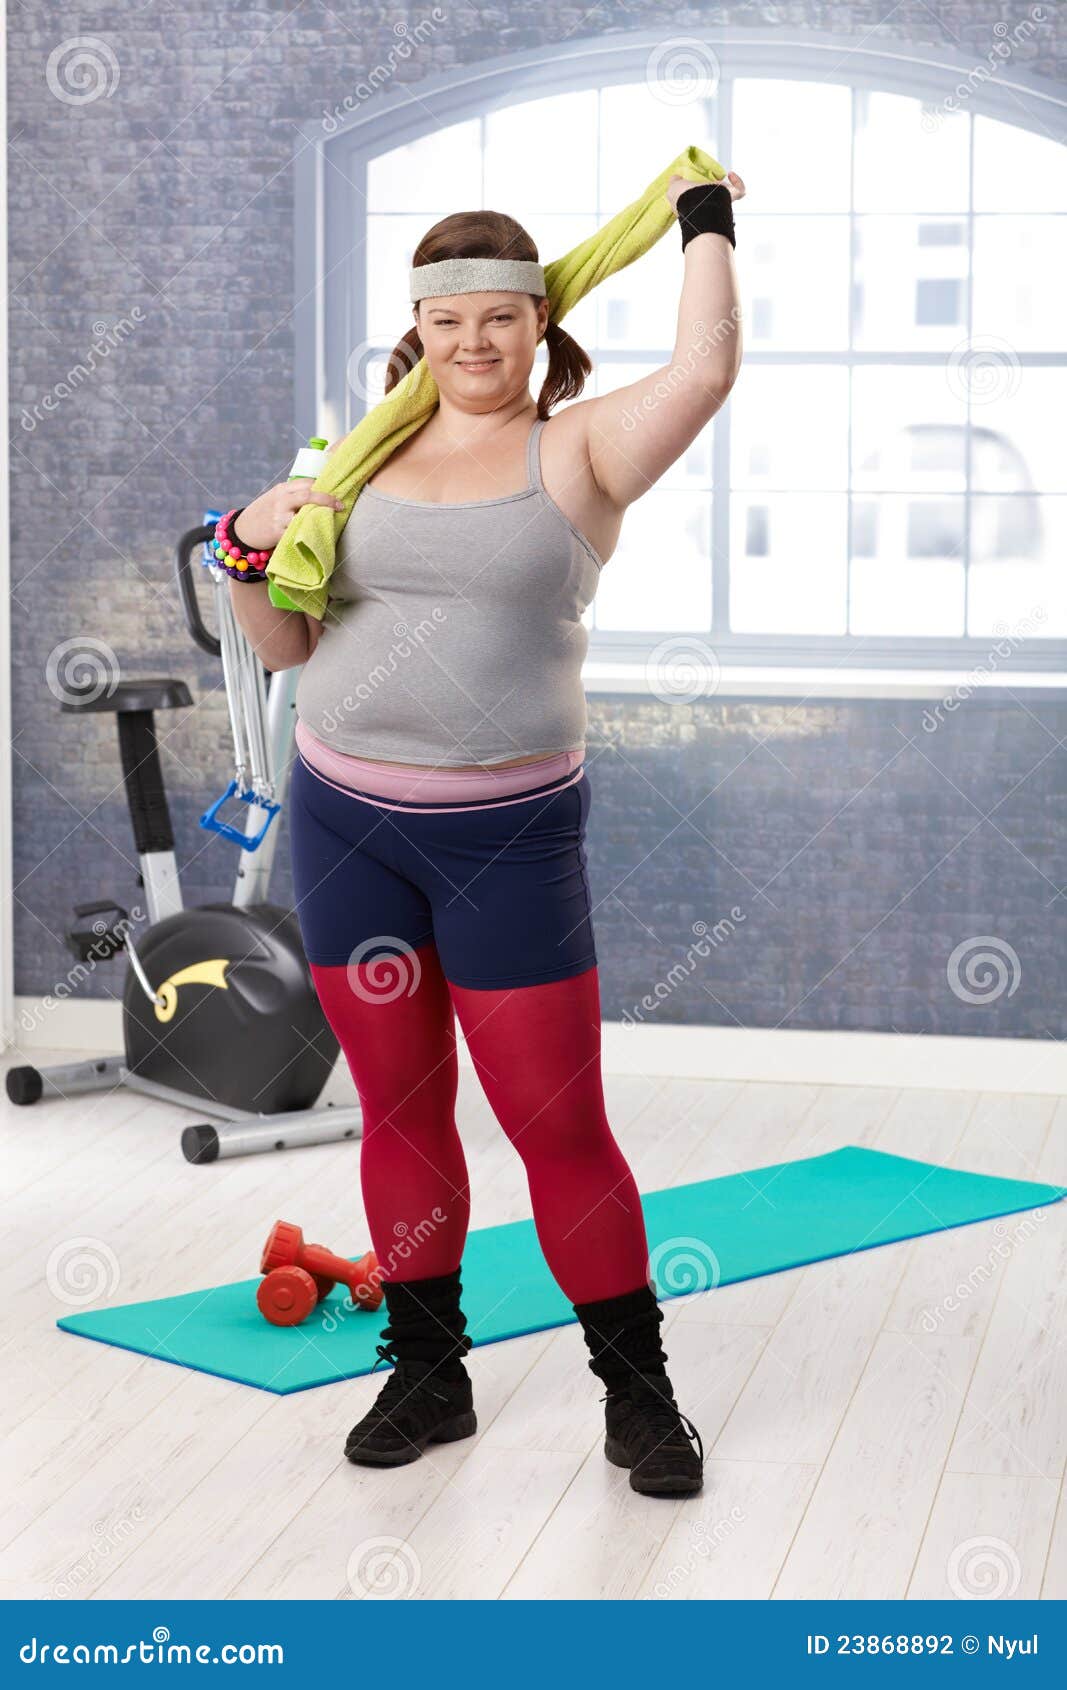 plump woman at the gym smiling